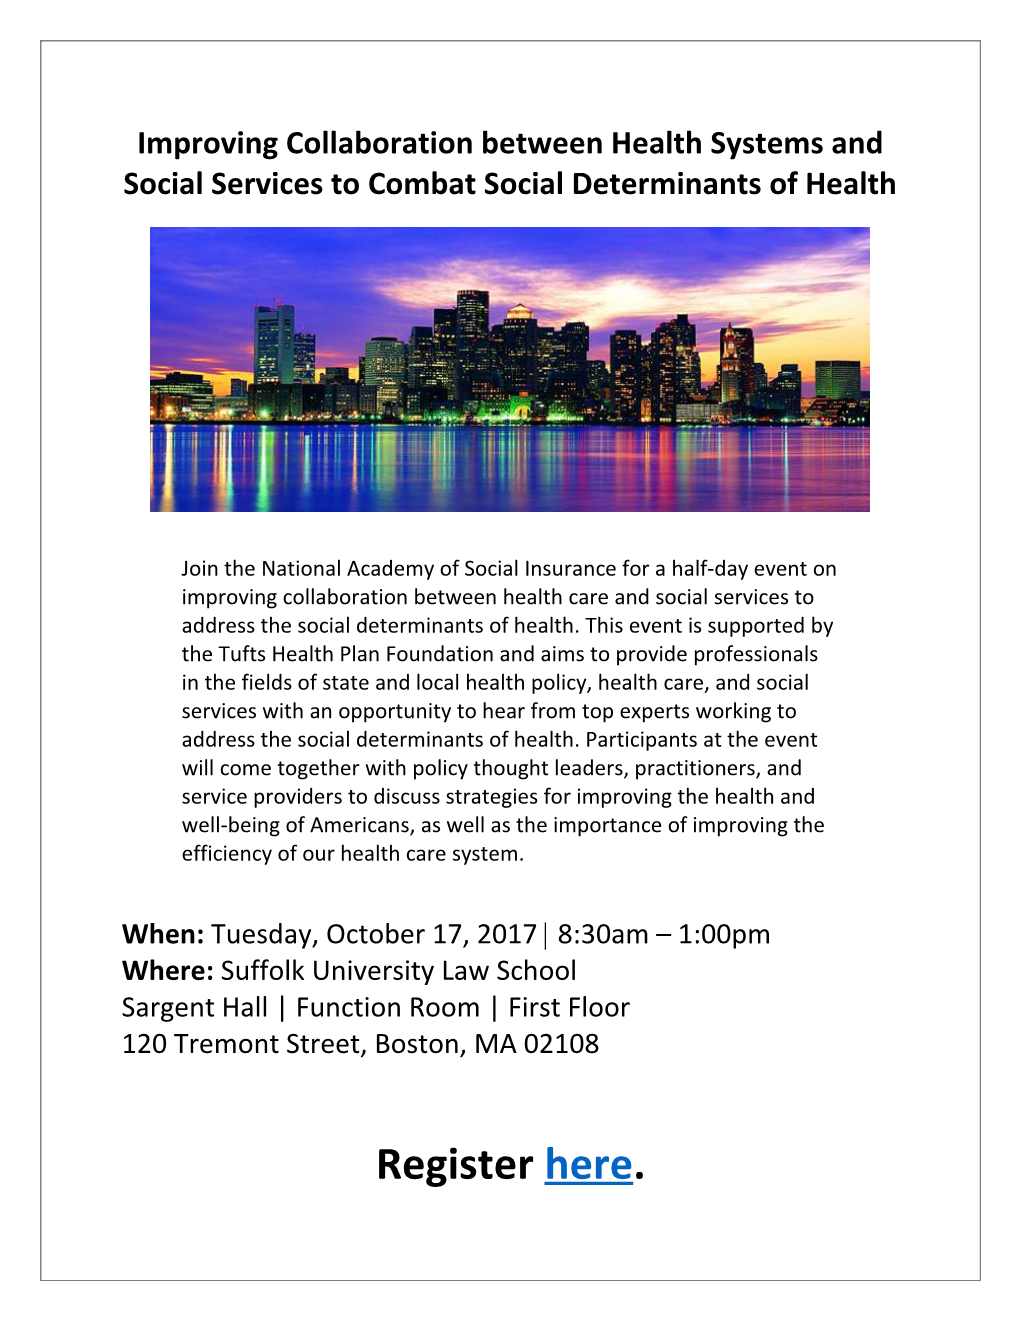 Improving Collaboration Between Health Systems and Social Services to Combat Social